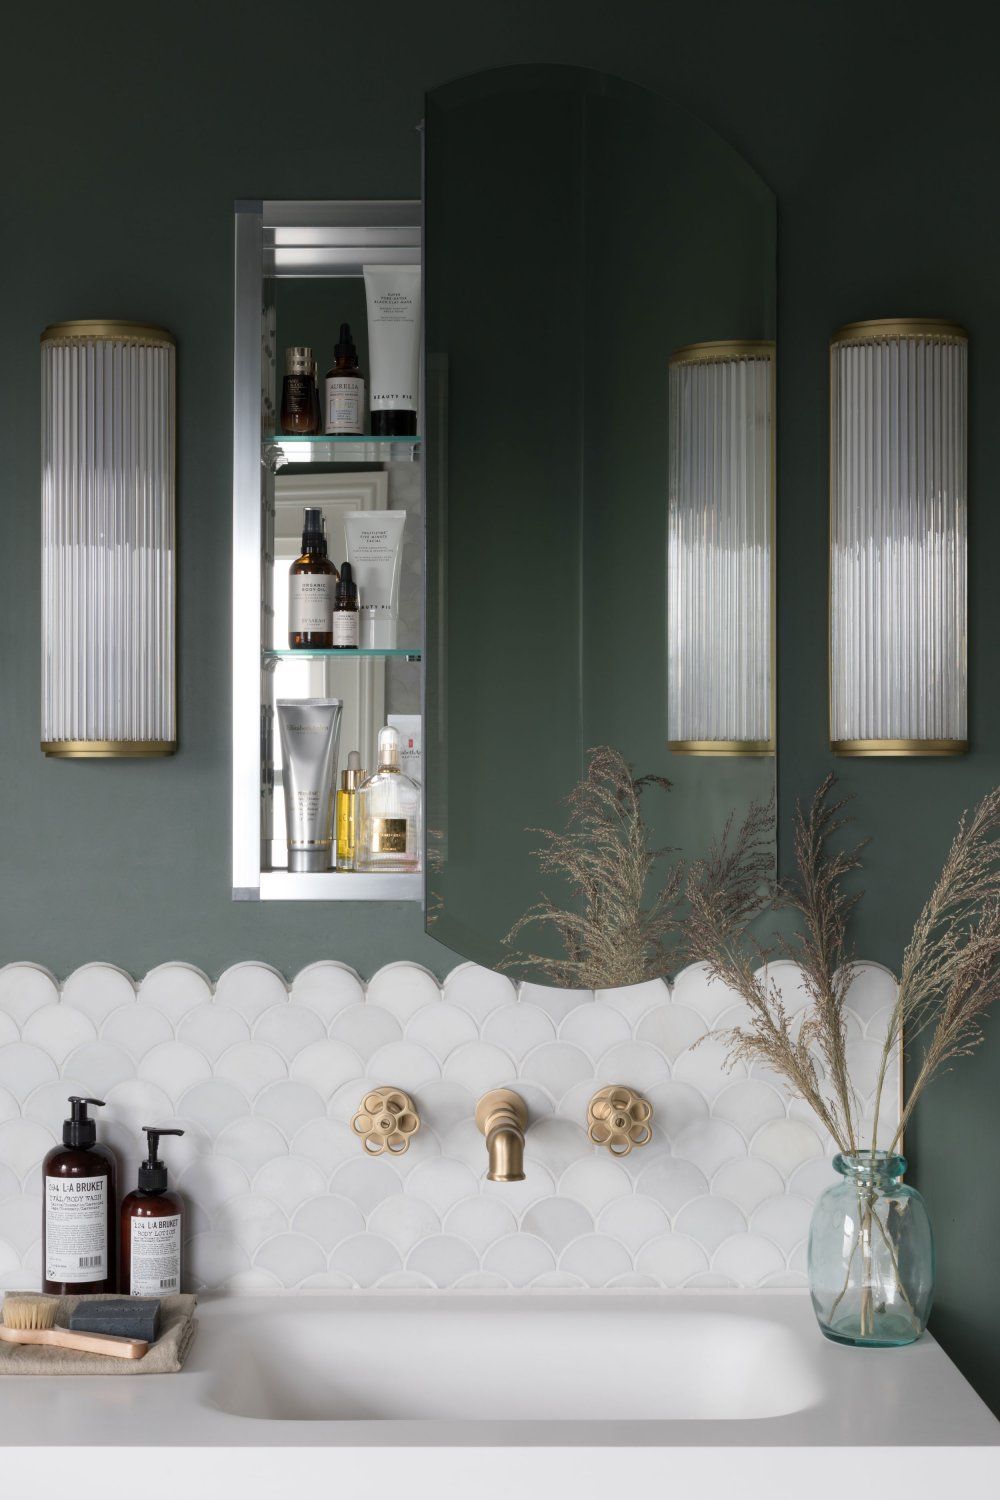 Bathroom Suites: Coordinating Your Bathroom for Seamless Style